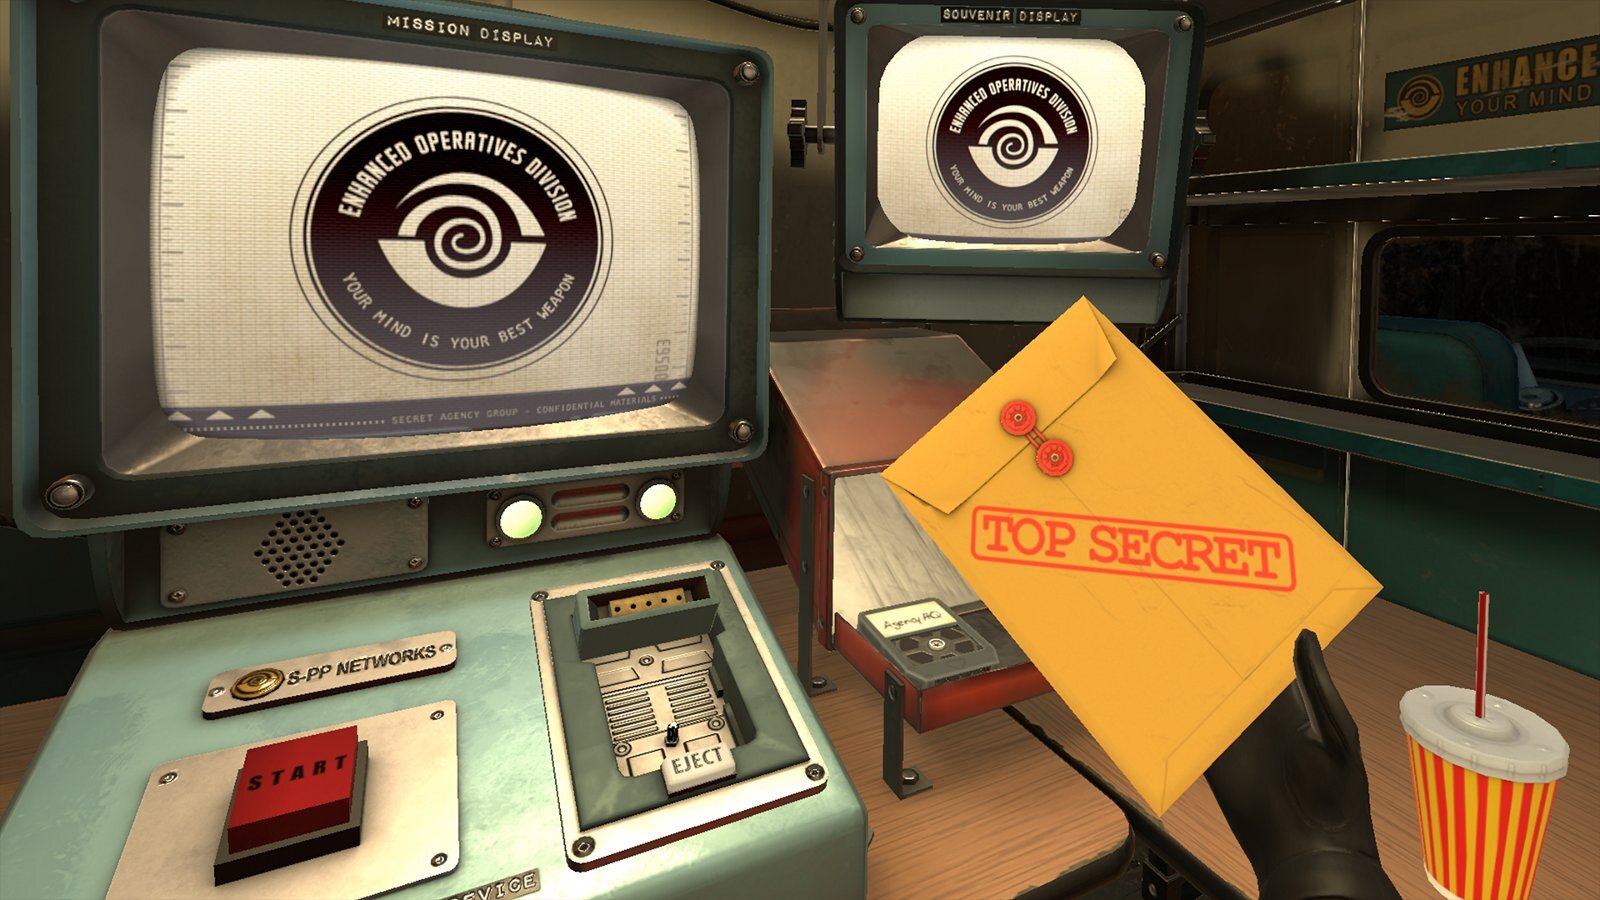 screenshot of game with manila envelope next to old fashioned tech